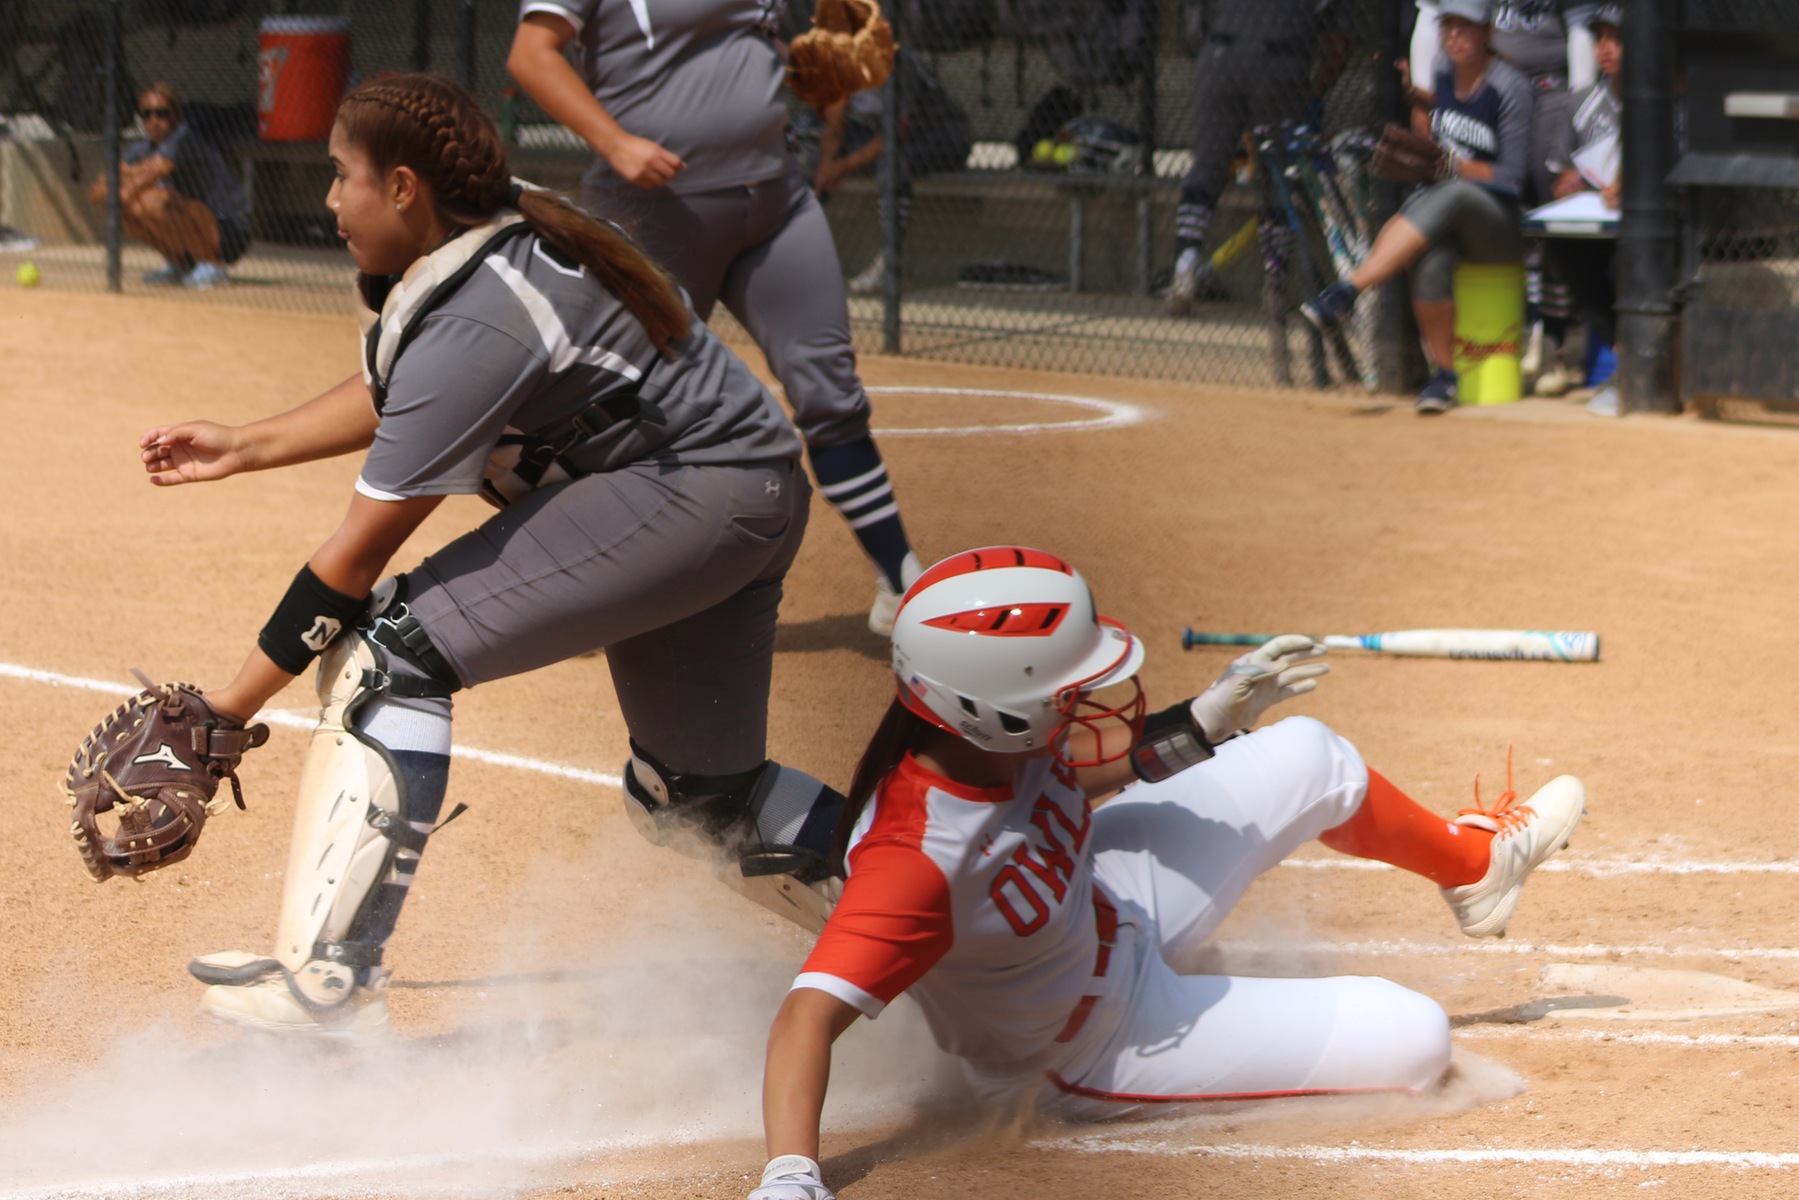 Mia Escobar beats the throw at home plate on Thursday. Photo credit: Treyvon Watts-Hale